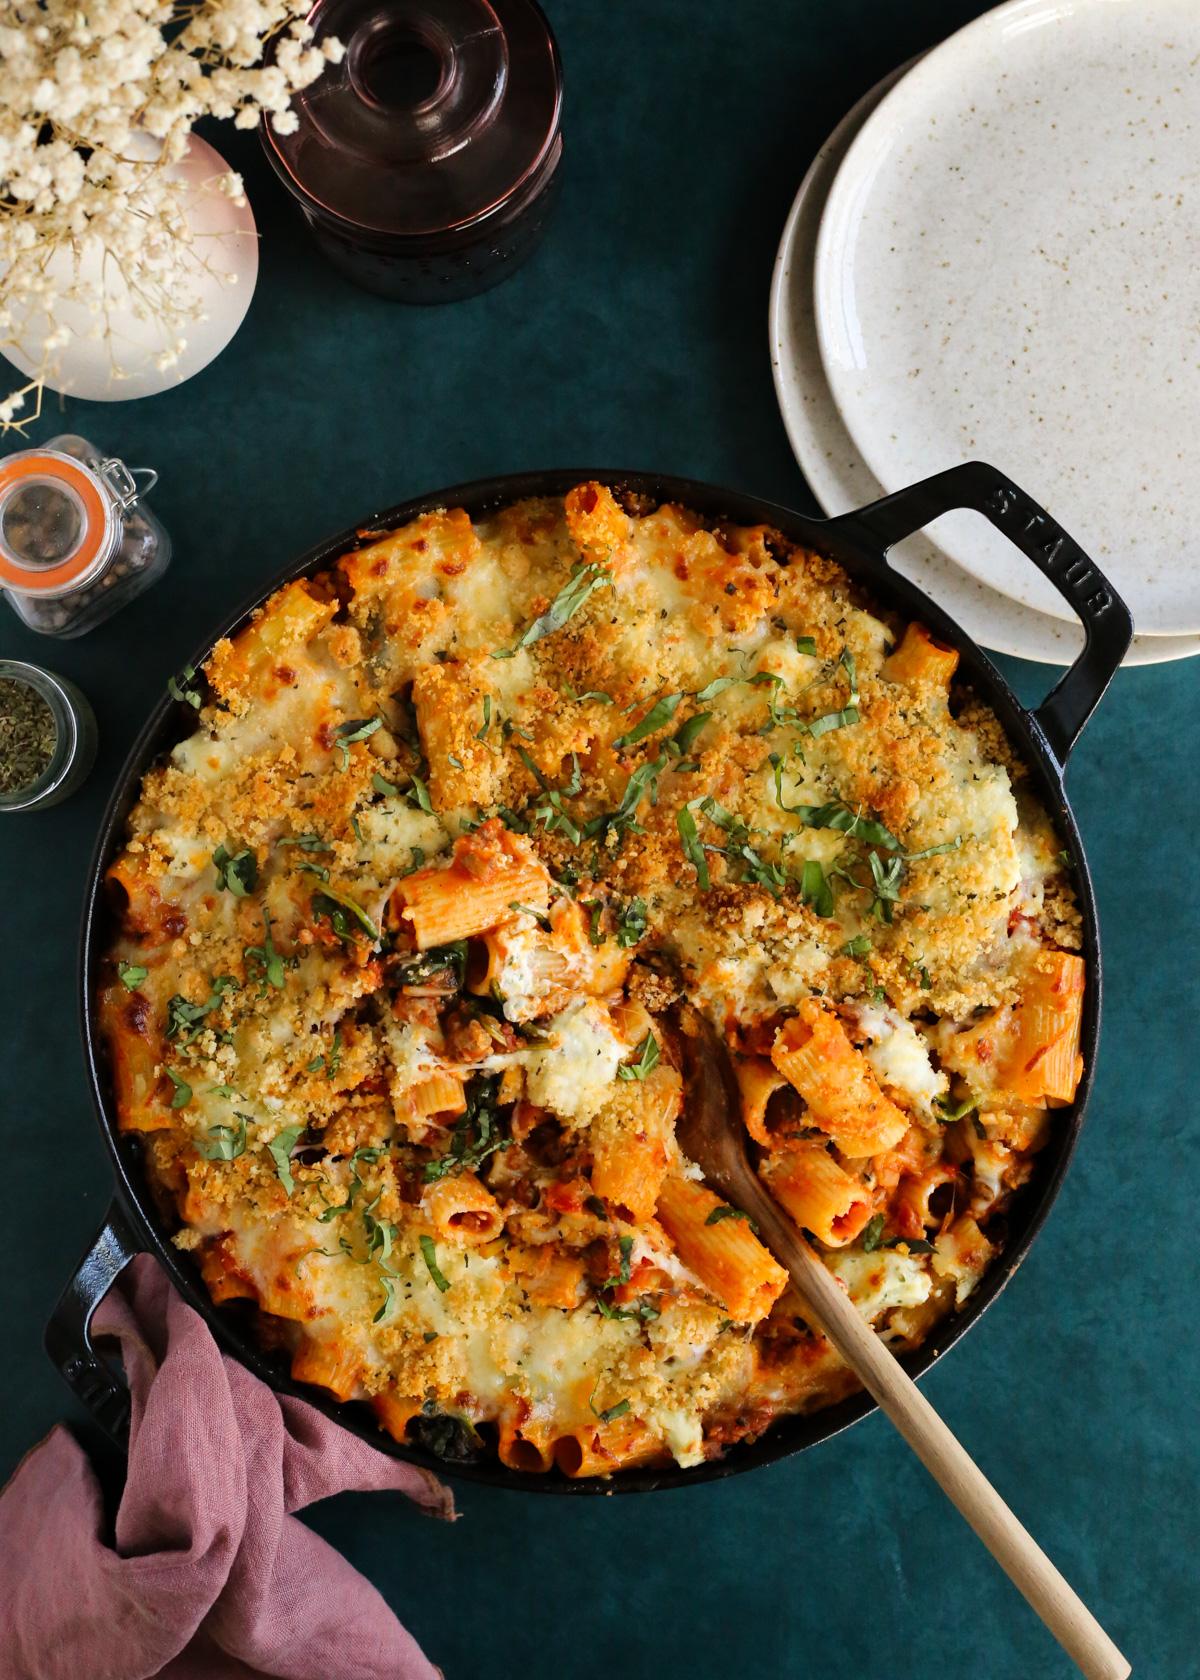 An overhead view of a round casserole dish on a dark teal backdrop, filled with a baked rigatoni recipe featuring a tomato sauce, fresh basil, and melted cheese, with a wooden serving spoon scooping out of the middle to reveal the melty cheese